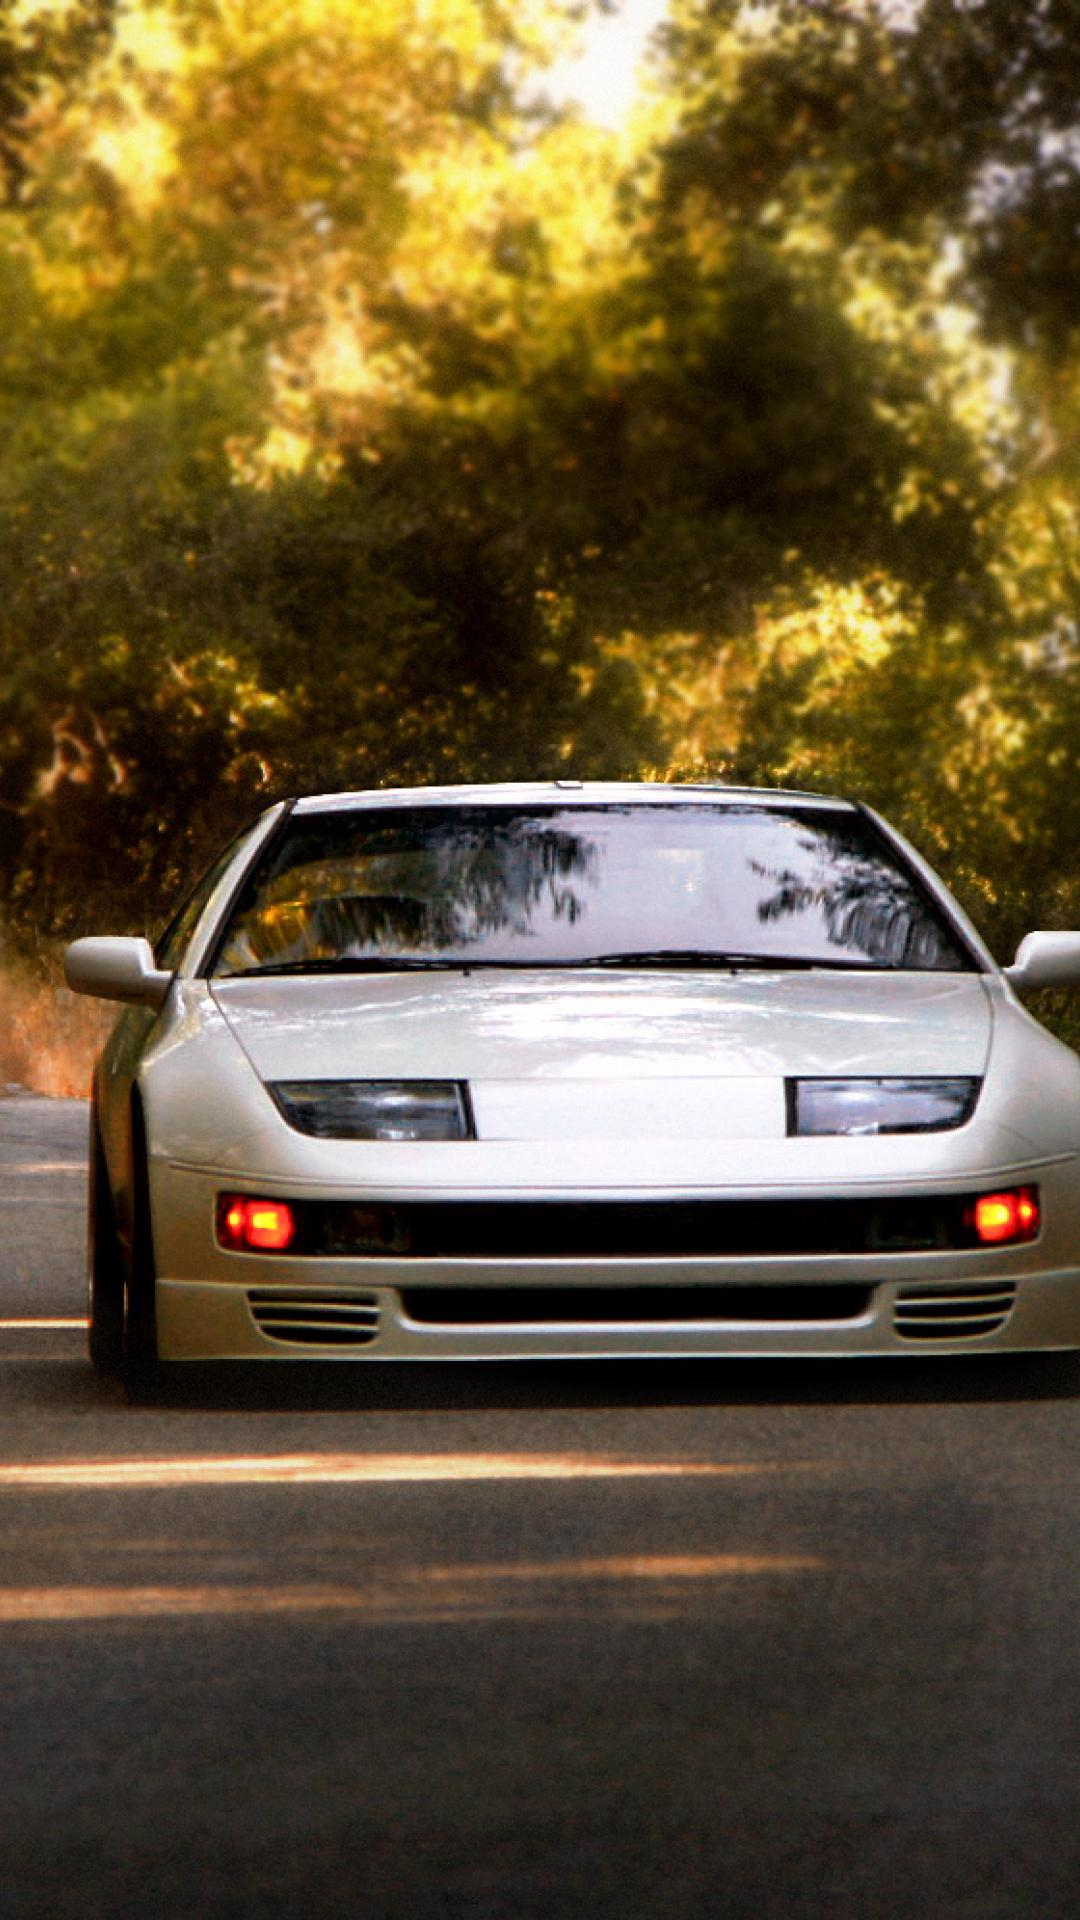 1080x1920 Nissan 300zx Wallpapers posted by John Thomps